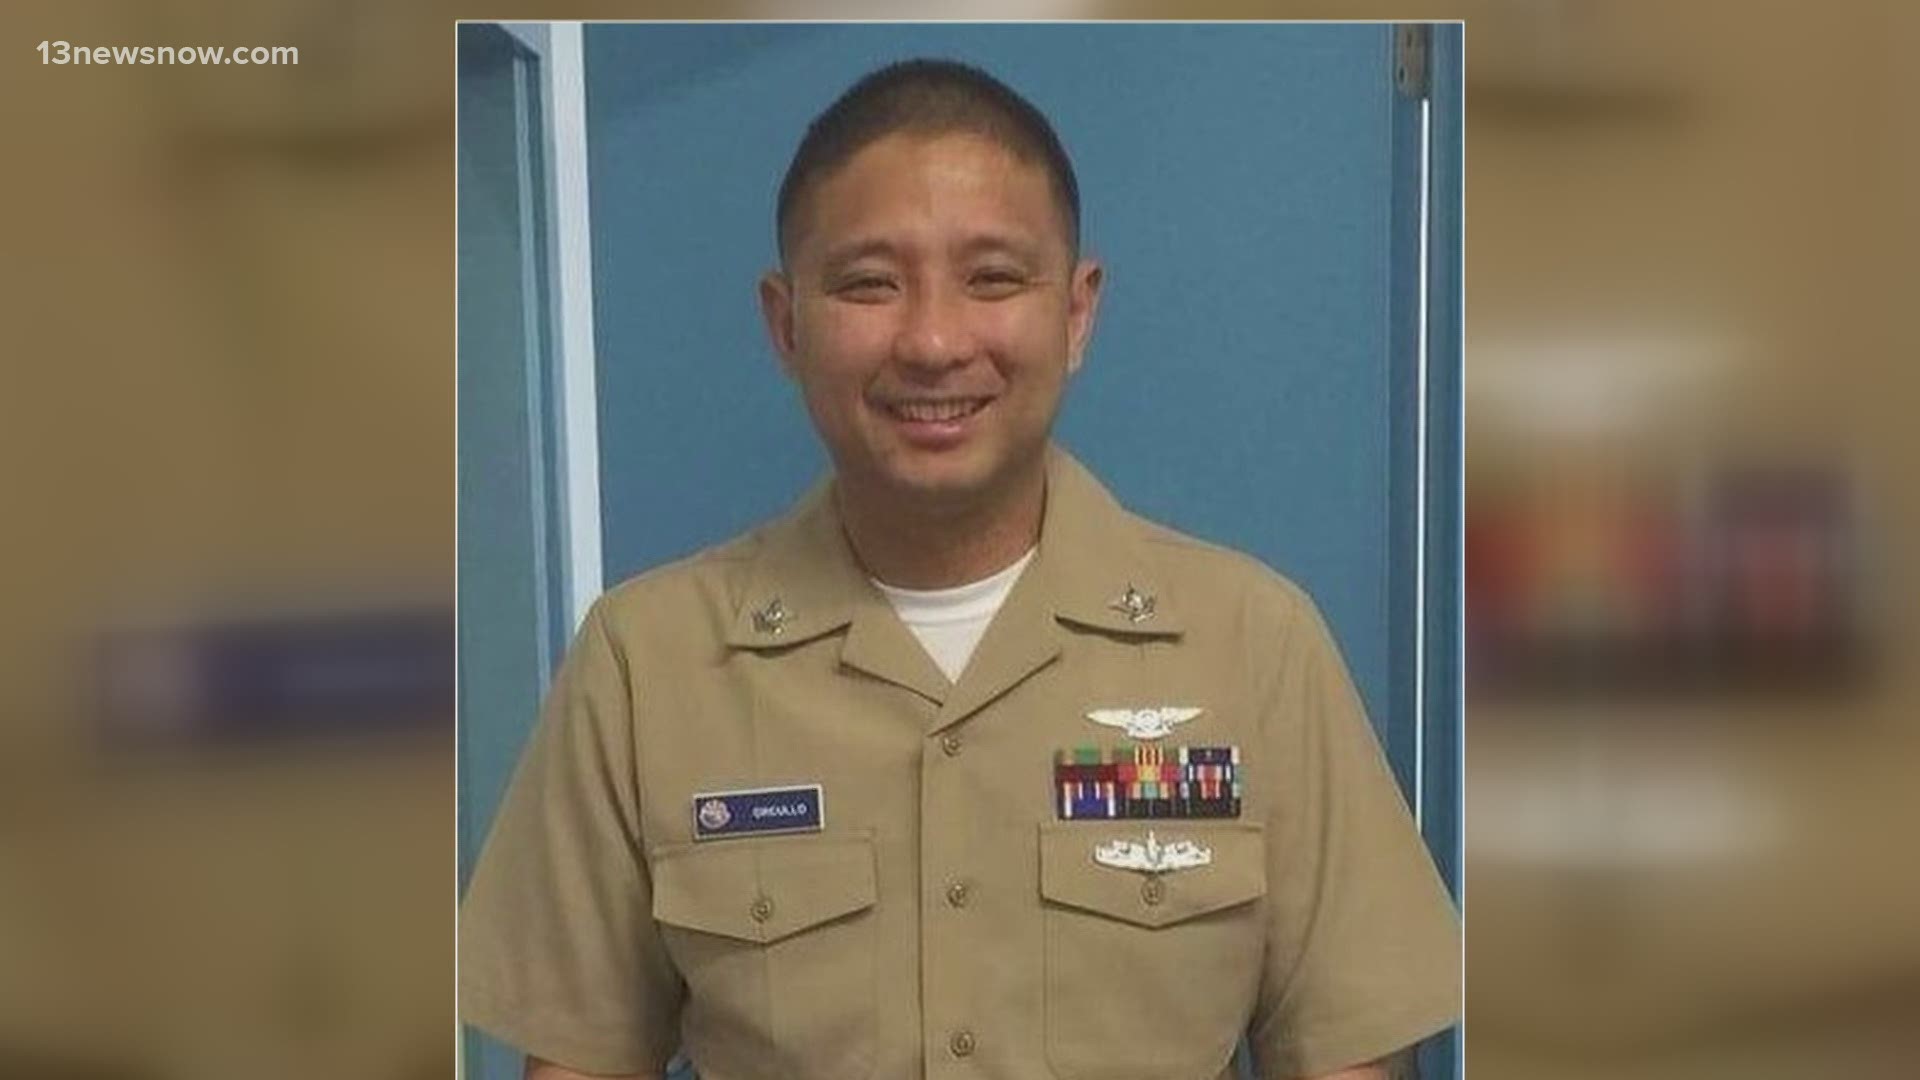 After the death of a USS Wasp sailor due to COVID-19 complications, the Navy is encouraging everyone on its ships to adhere to health regulations.